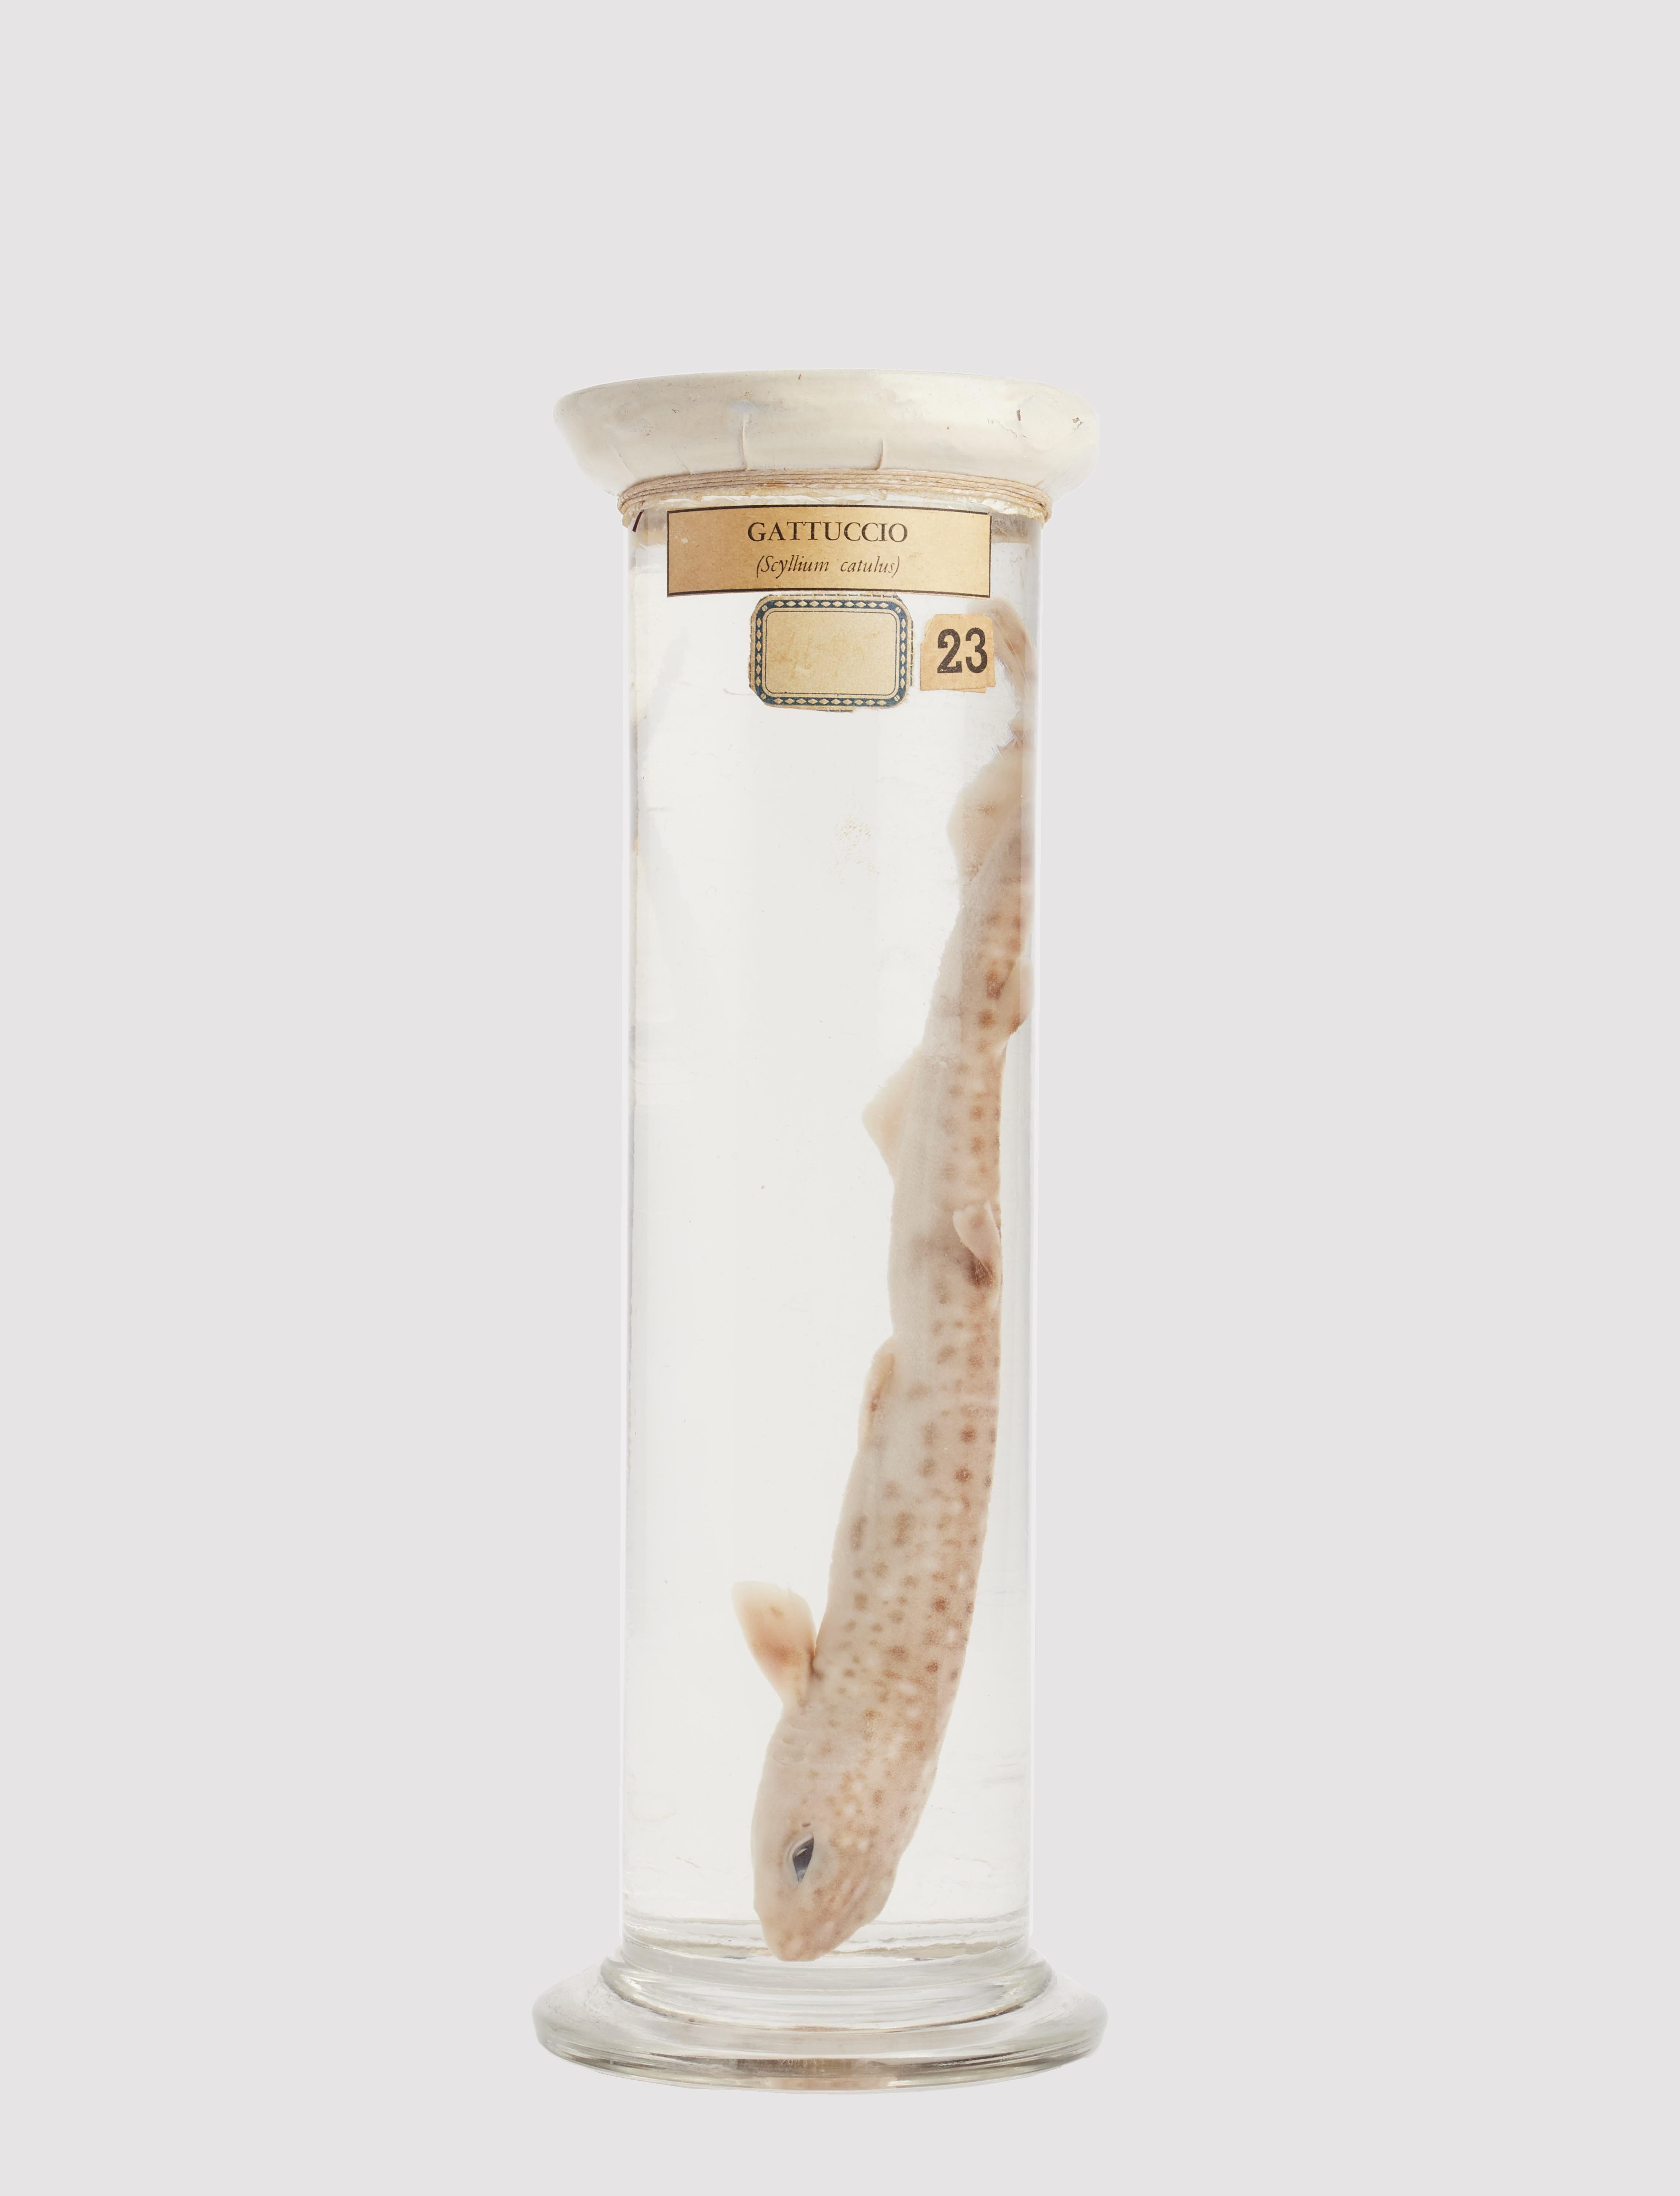 A natural specimen of  Gattuccio (Scyllum Catulus), preserved in formaldehyde and sealed on cylindric shape glass vase. Italiy early 20th century. 